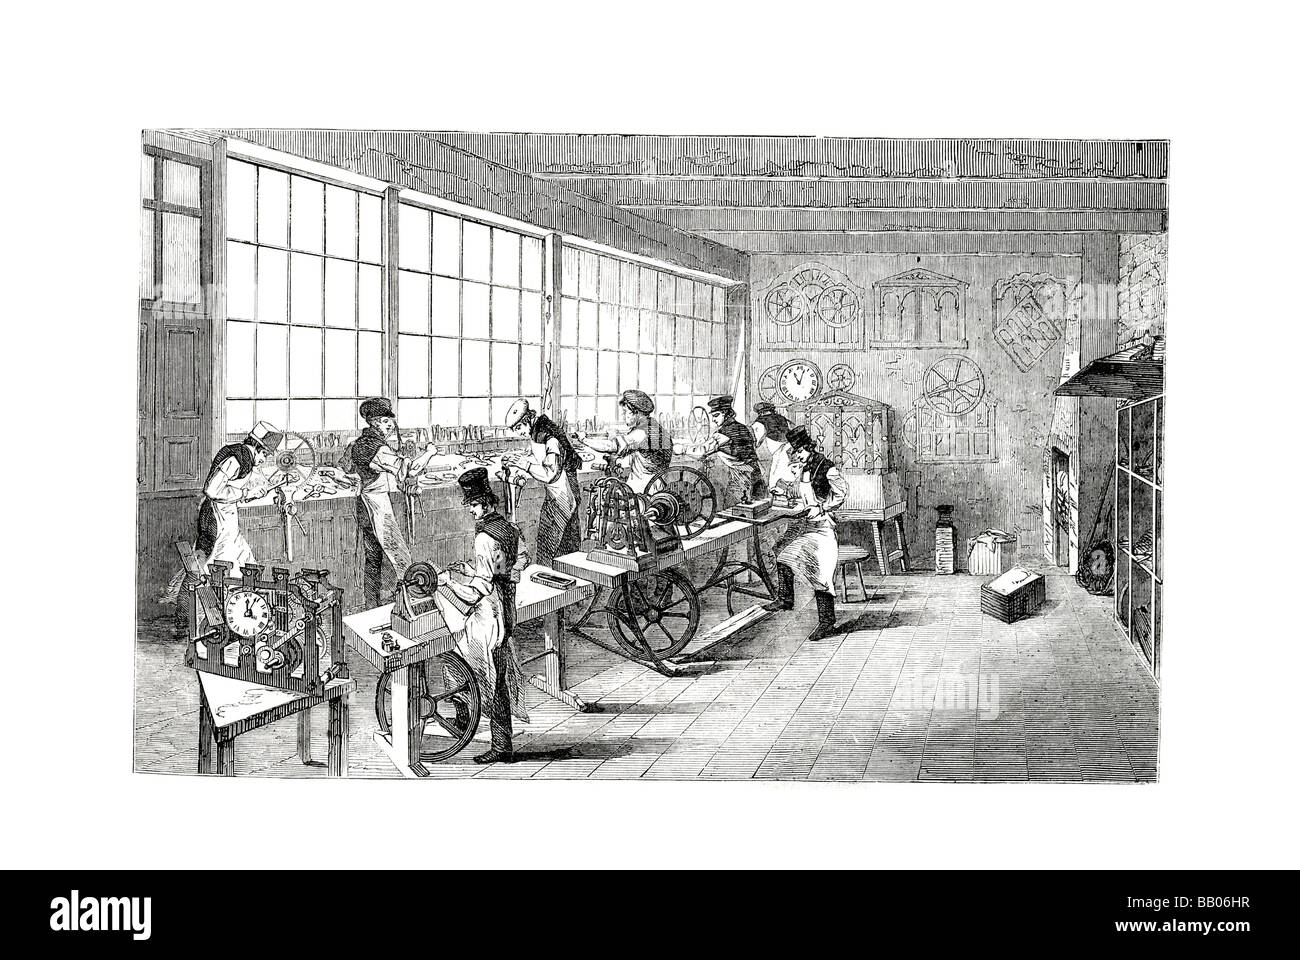 the turret clock shop industrial work force workers machinery machines industry people traditional clothing period dress Stock Photo